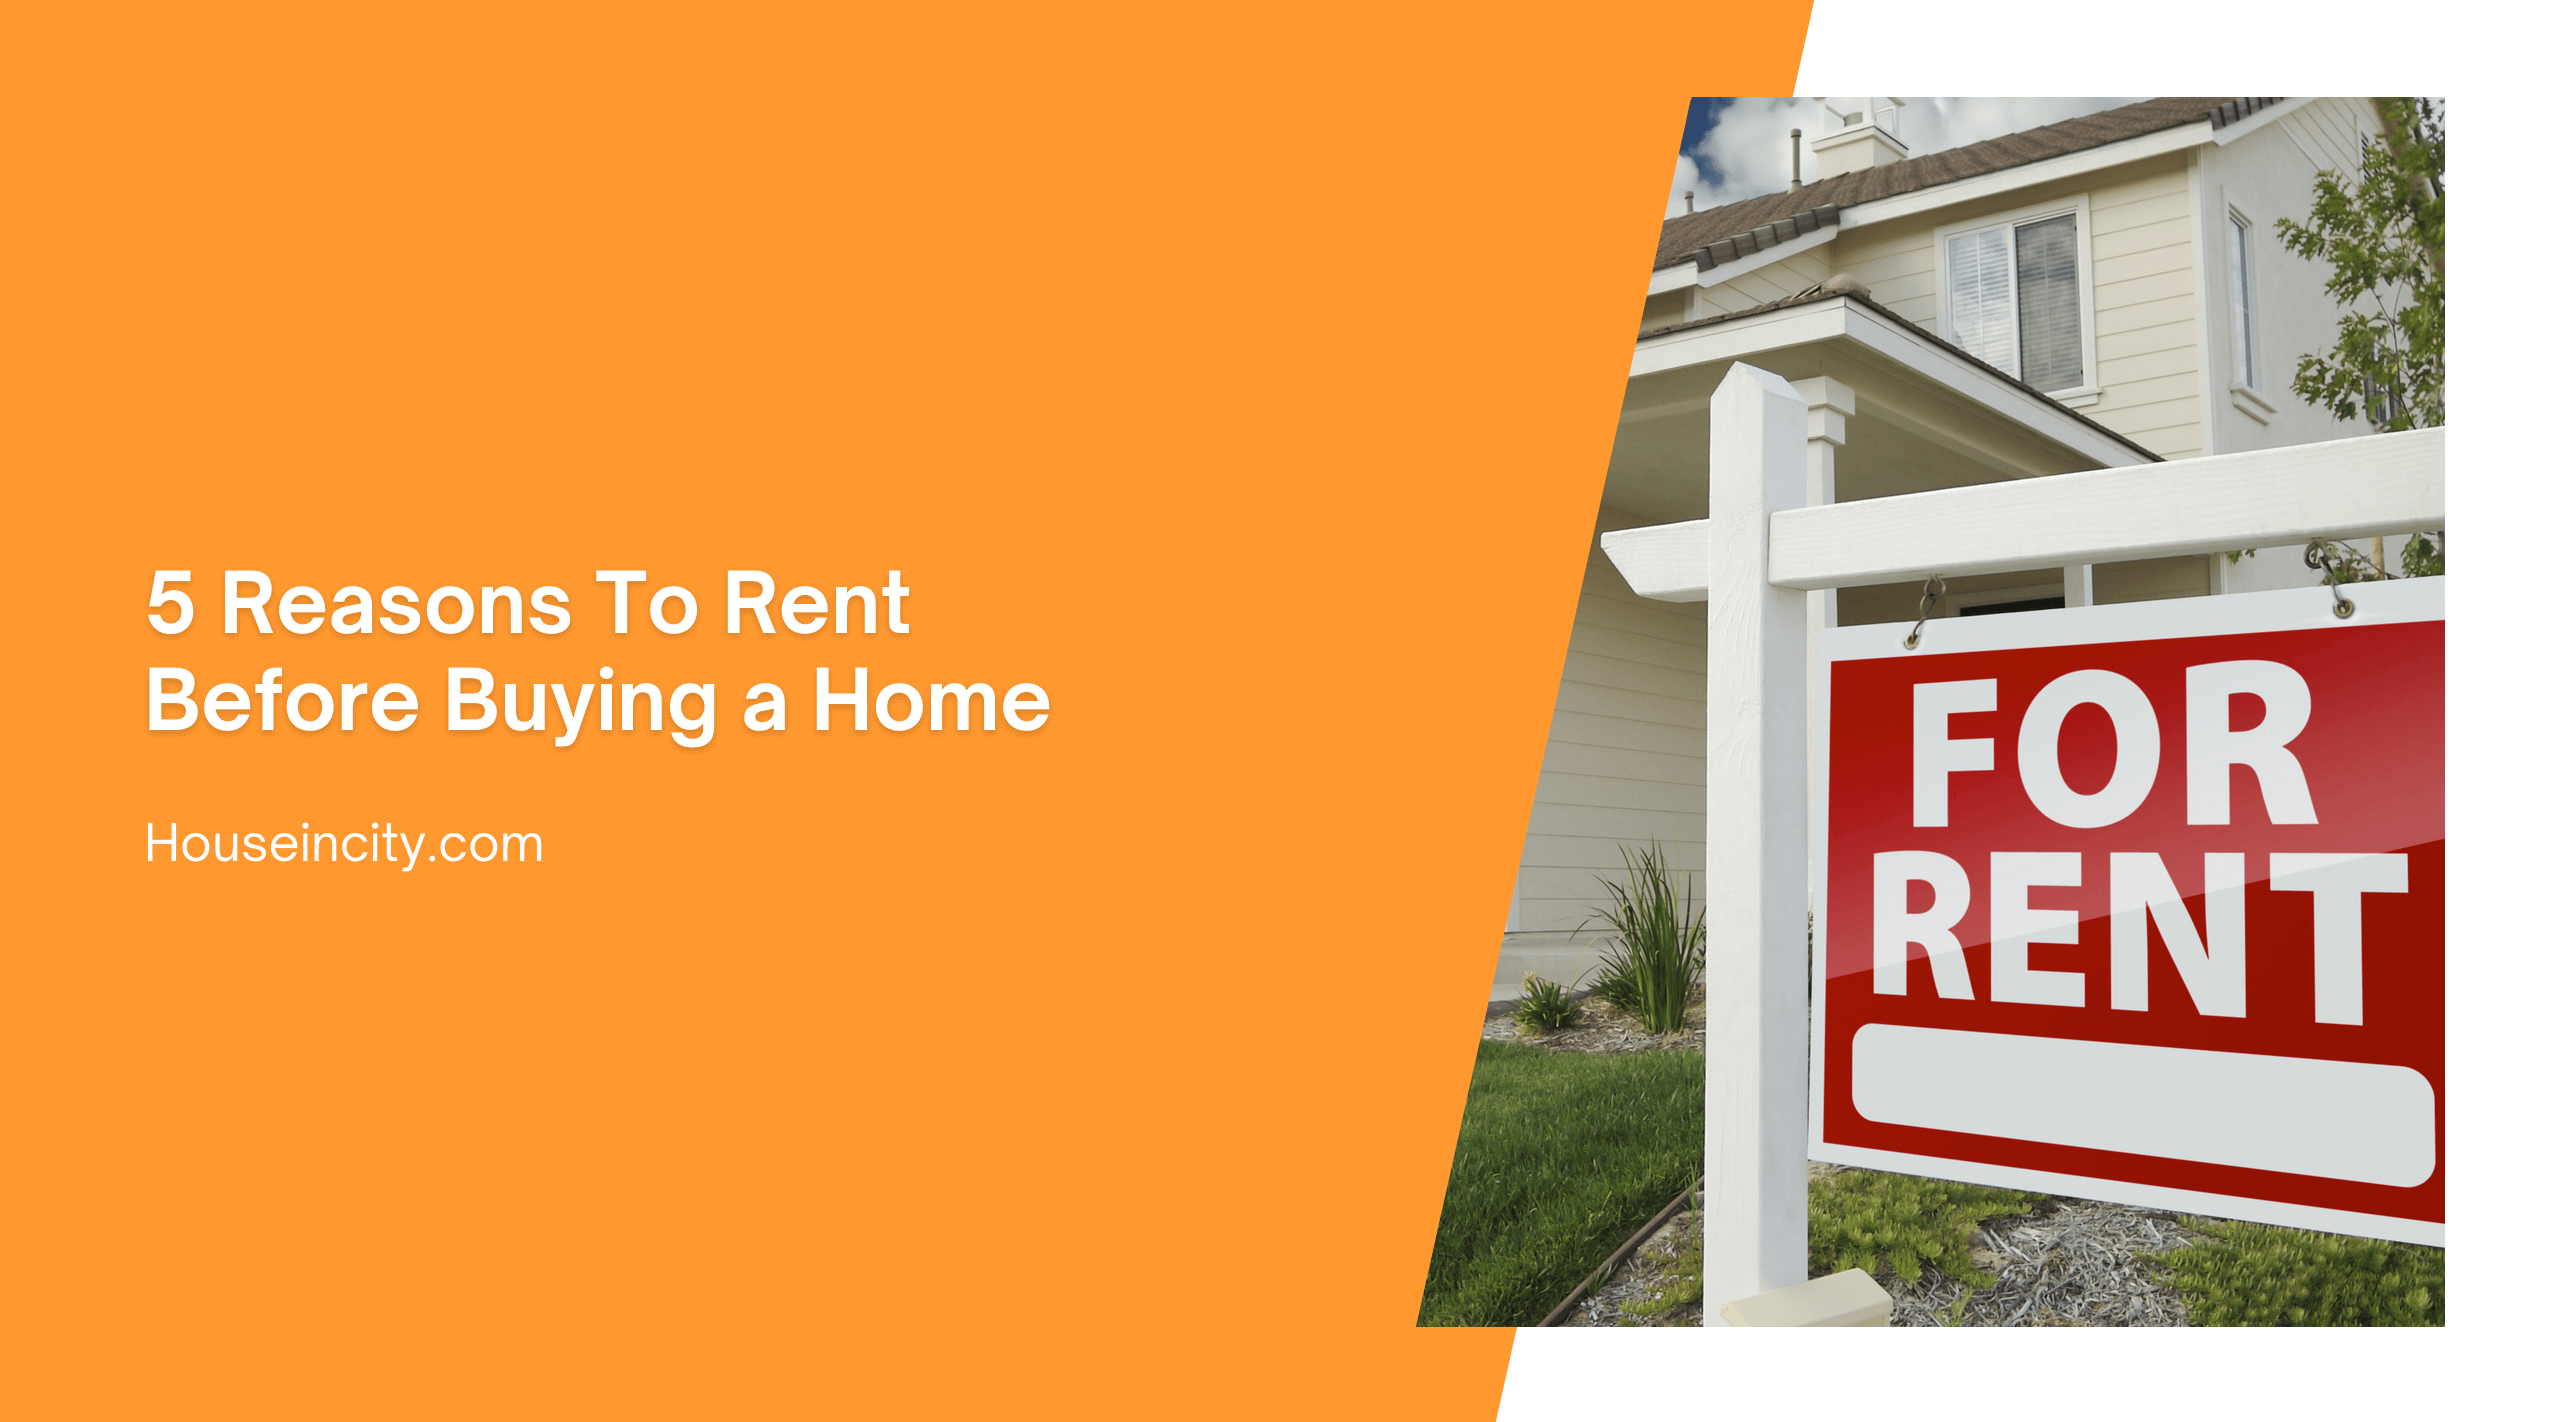 5 Reasons To Rent Before Buying a Home